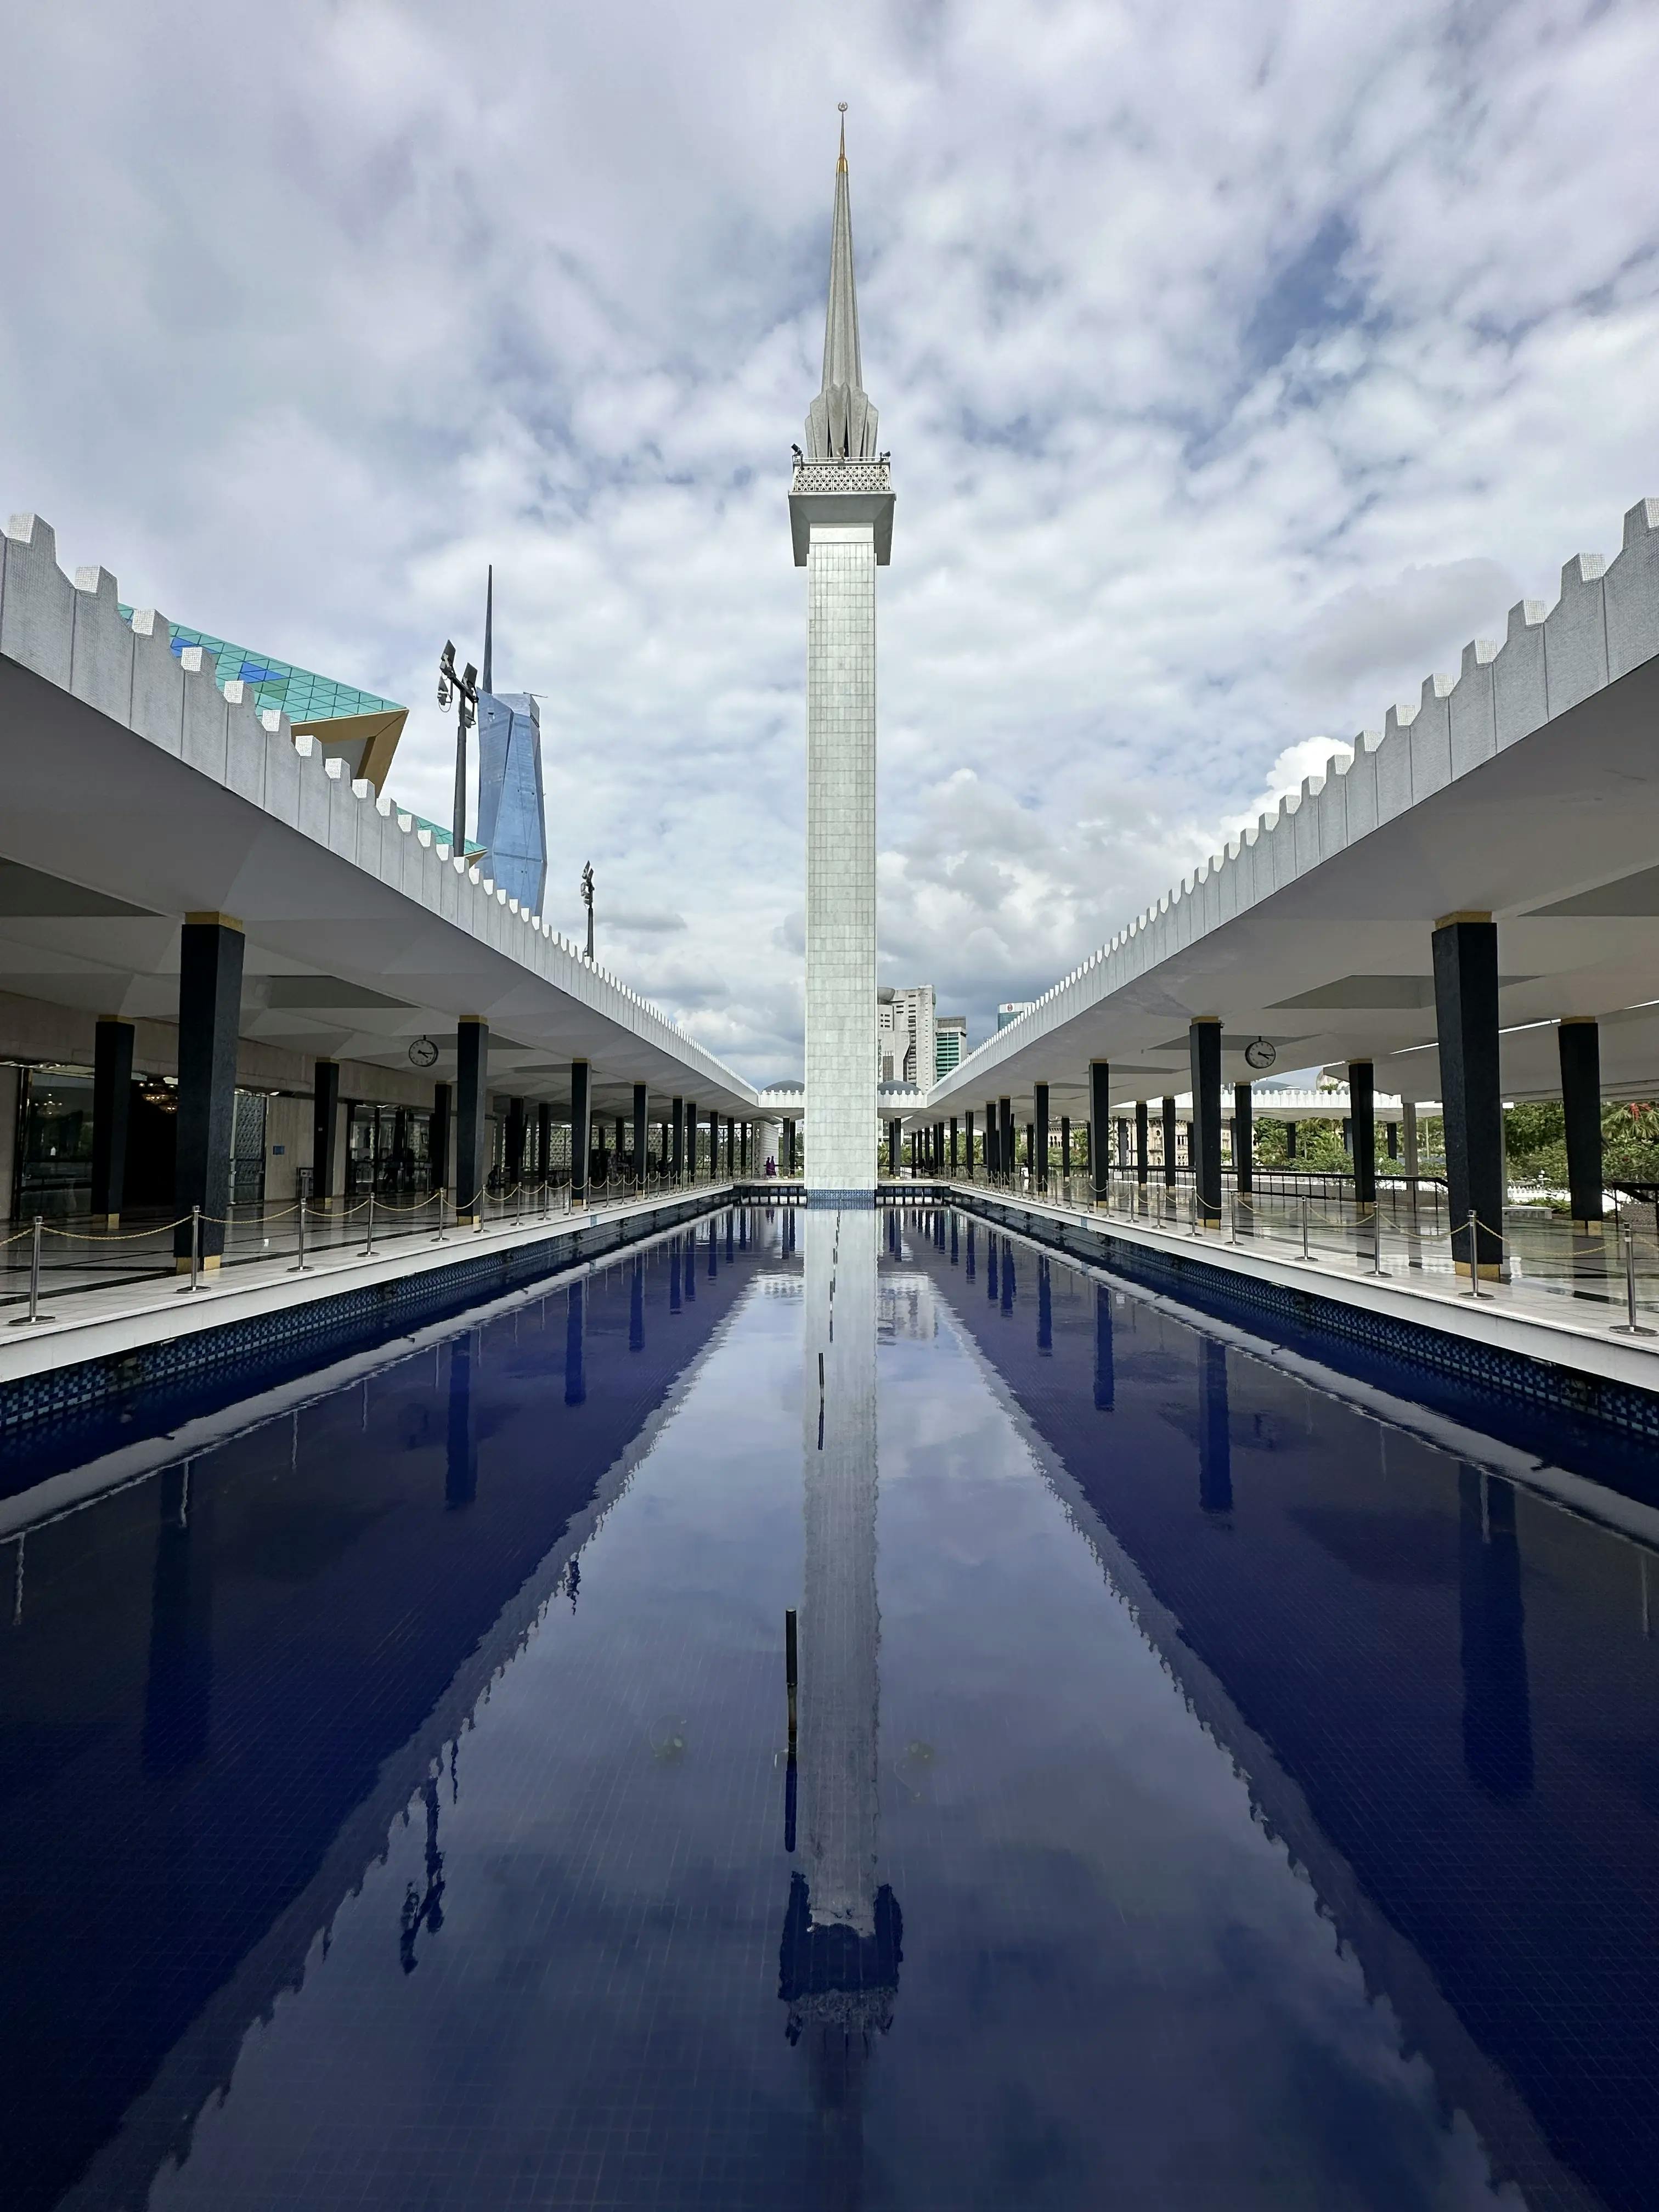 picture in perspective of the minaret of the National Mosque of Malaysia in Kuala Lumpur. On thw way to the minaret there is pool full of bright blue water. On the side of the pool, two corridors with a lot of black columns and a white roof